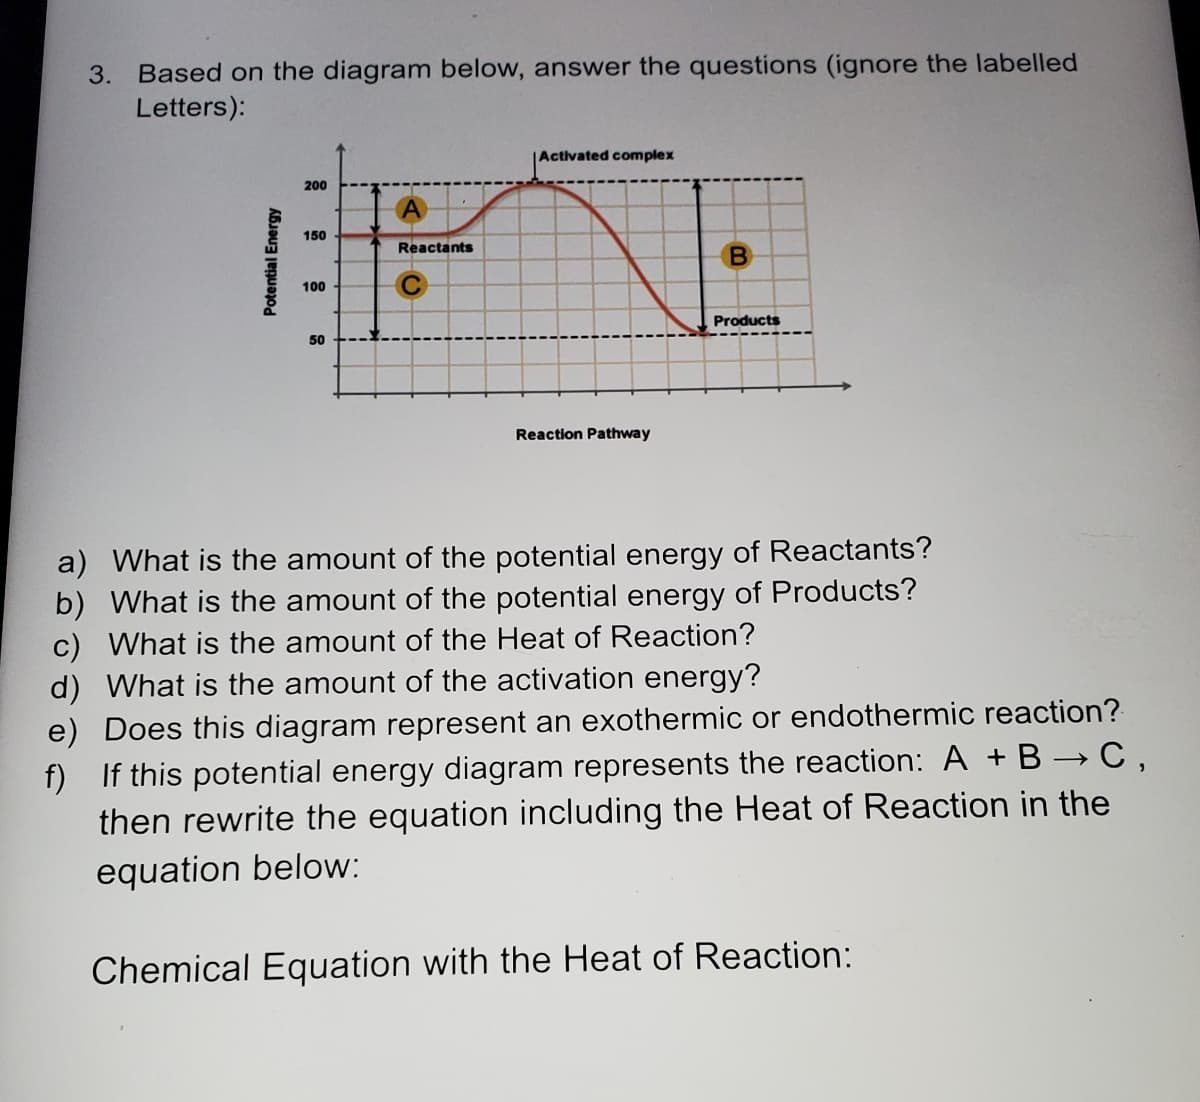 3. Based on the diagram below, answer the questions (ignore the labelled
Letters):
Activated complex
200
150
Reactants
100
Products
50
Reaction Pathway
a) What is the amount of the potential energy of Reactants?
b) What is the amount of the potential energy of Products?
c) What is the amount of the Heat of Reaction?
d) What is the amount of the activation energy?
e) Does this diagram represent an exothermic or endothermic reaction?
f) If this potential energy diagram represents the reaction: A + B → C ,
then rewrite the equation including the Heat of Reaction in the
equation below:
Chemical Equation with the Heat of Reaction:
Potential Energy
